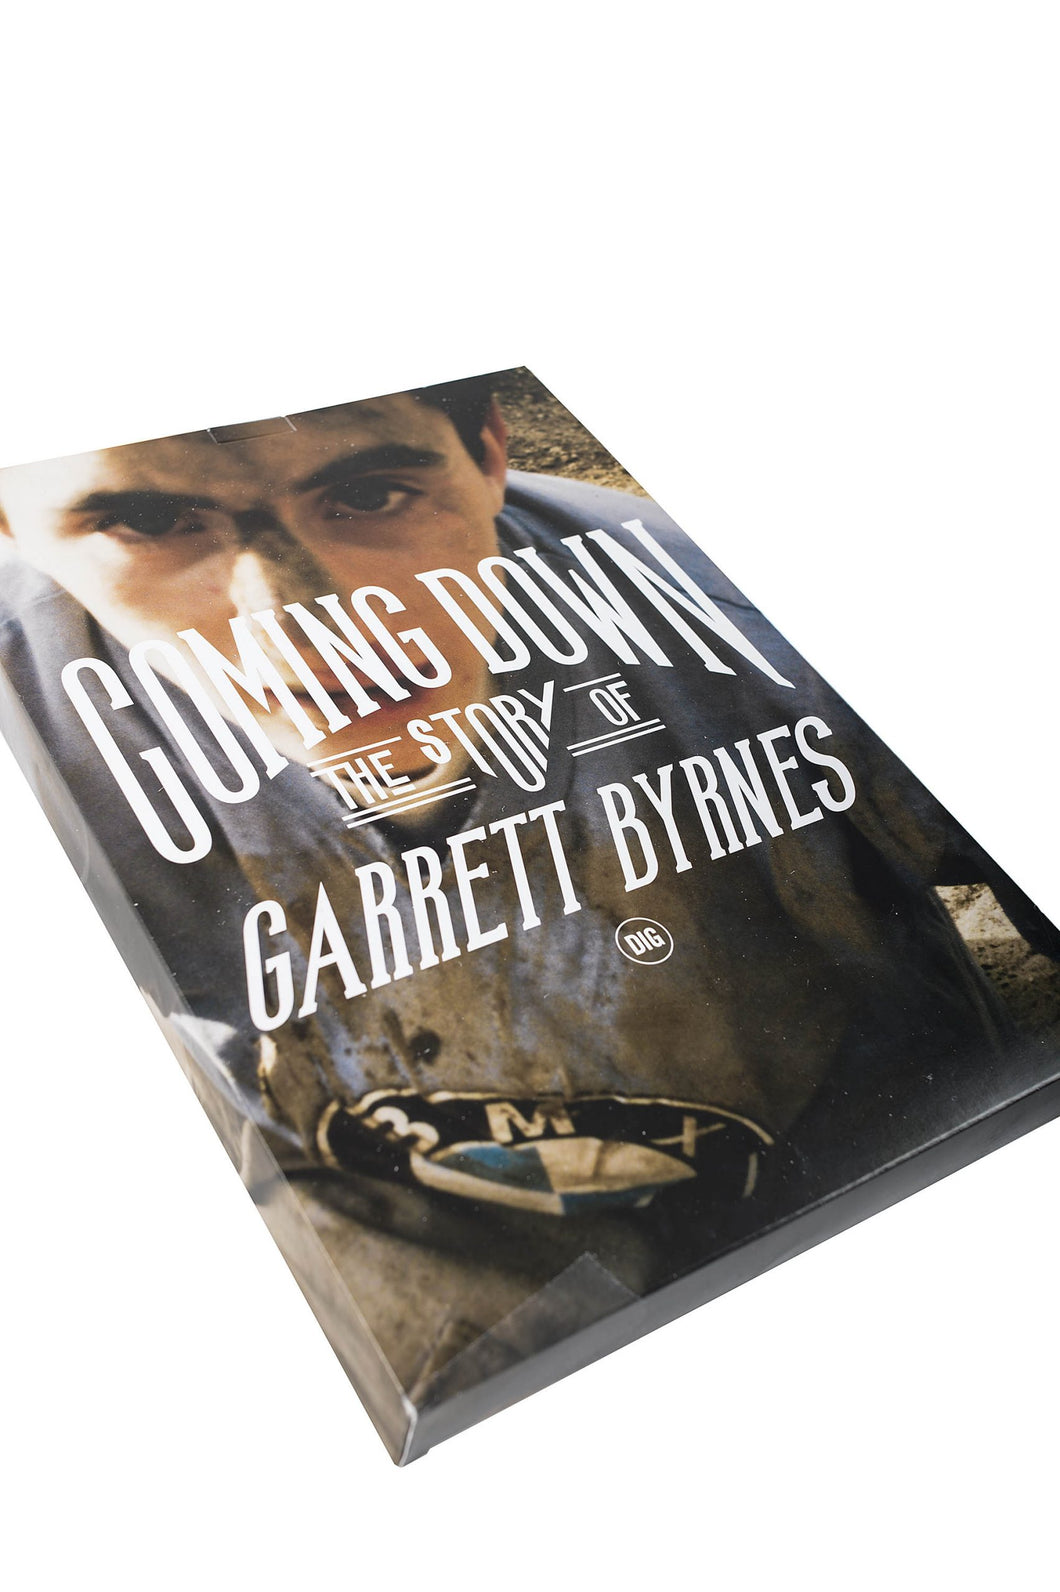 Garrett Byrnes 'Coming Down' Limited Edition DVD Collectors Box Set. DIG Issue 99.6